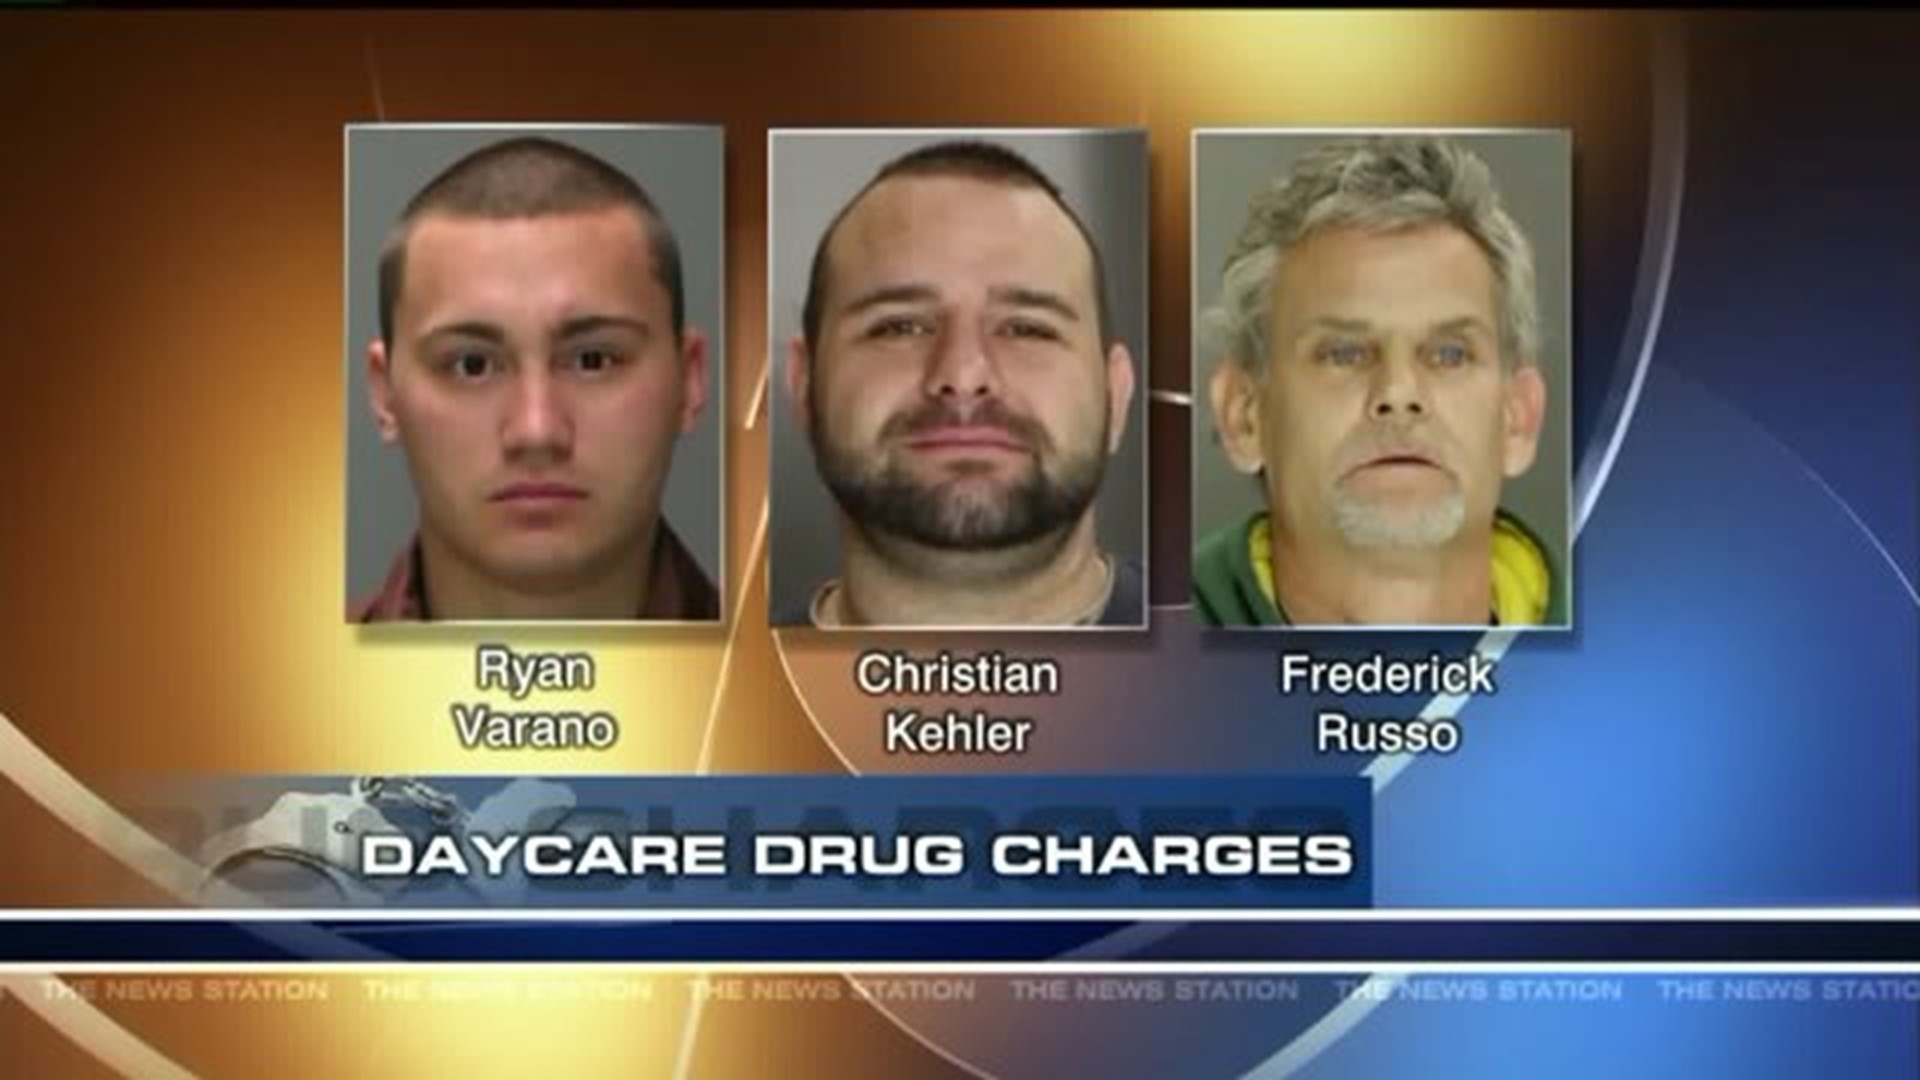 Police: Three Men Dealing Drugs at Day Care Center